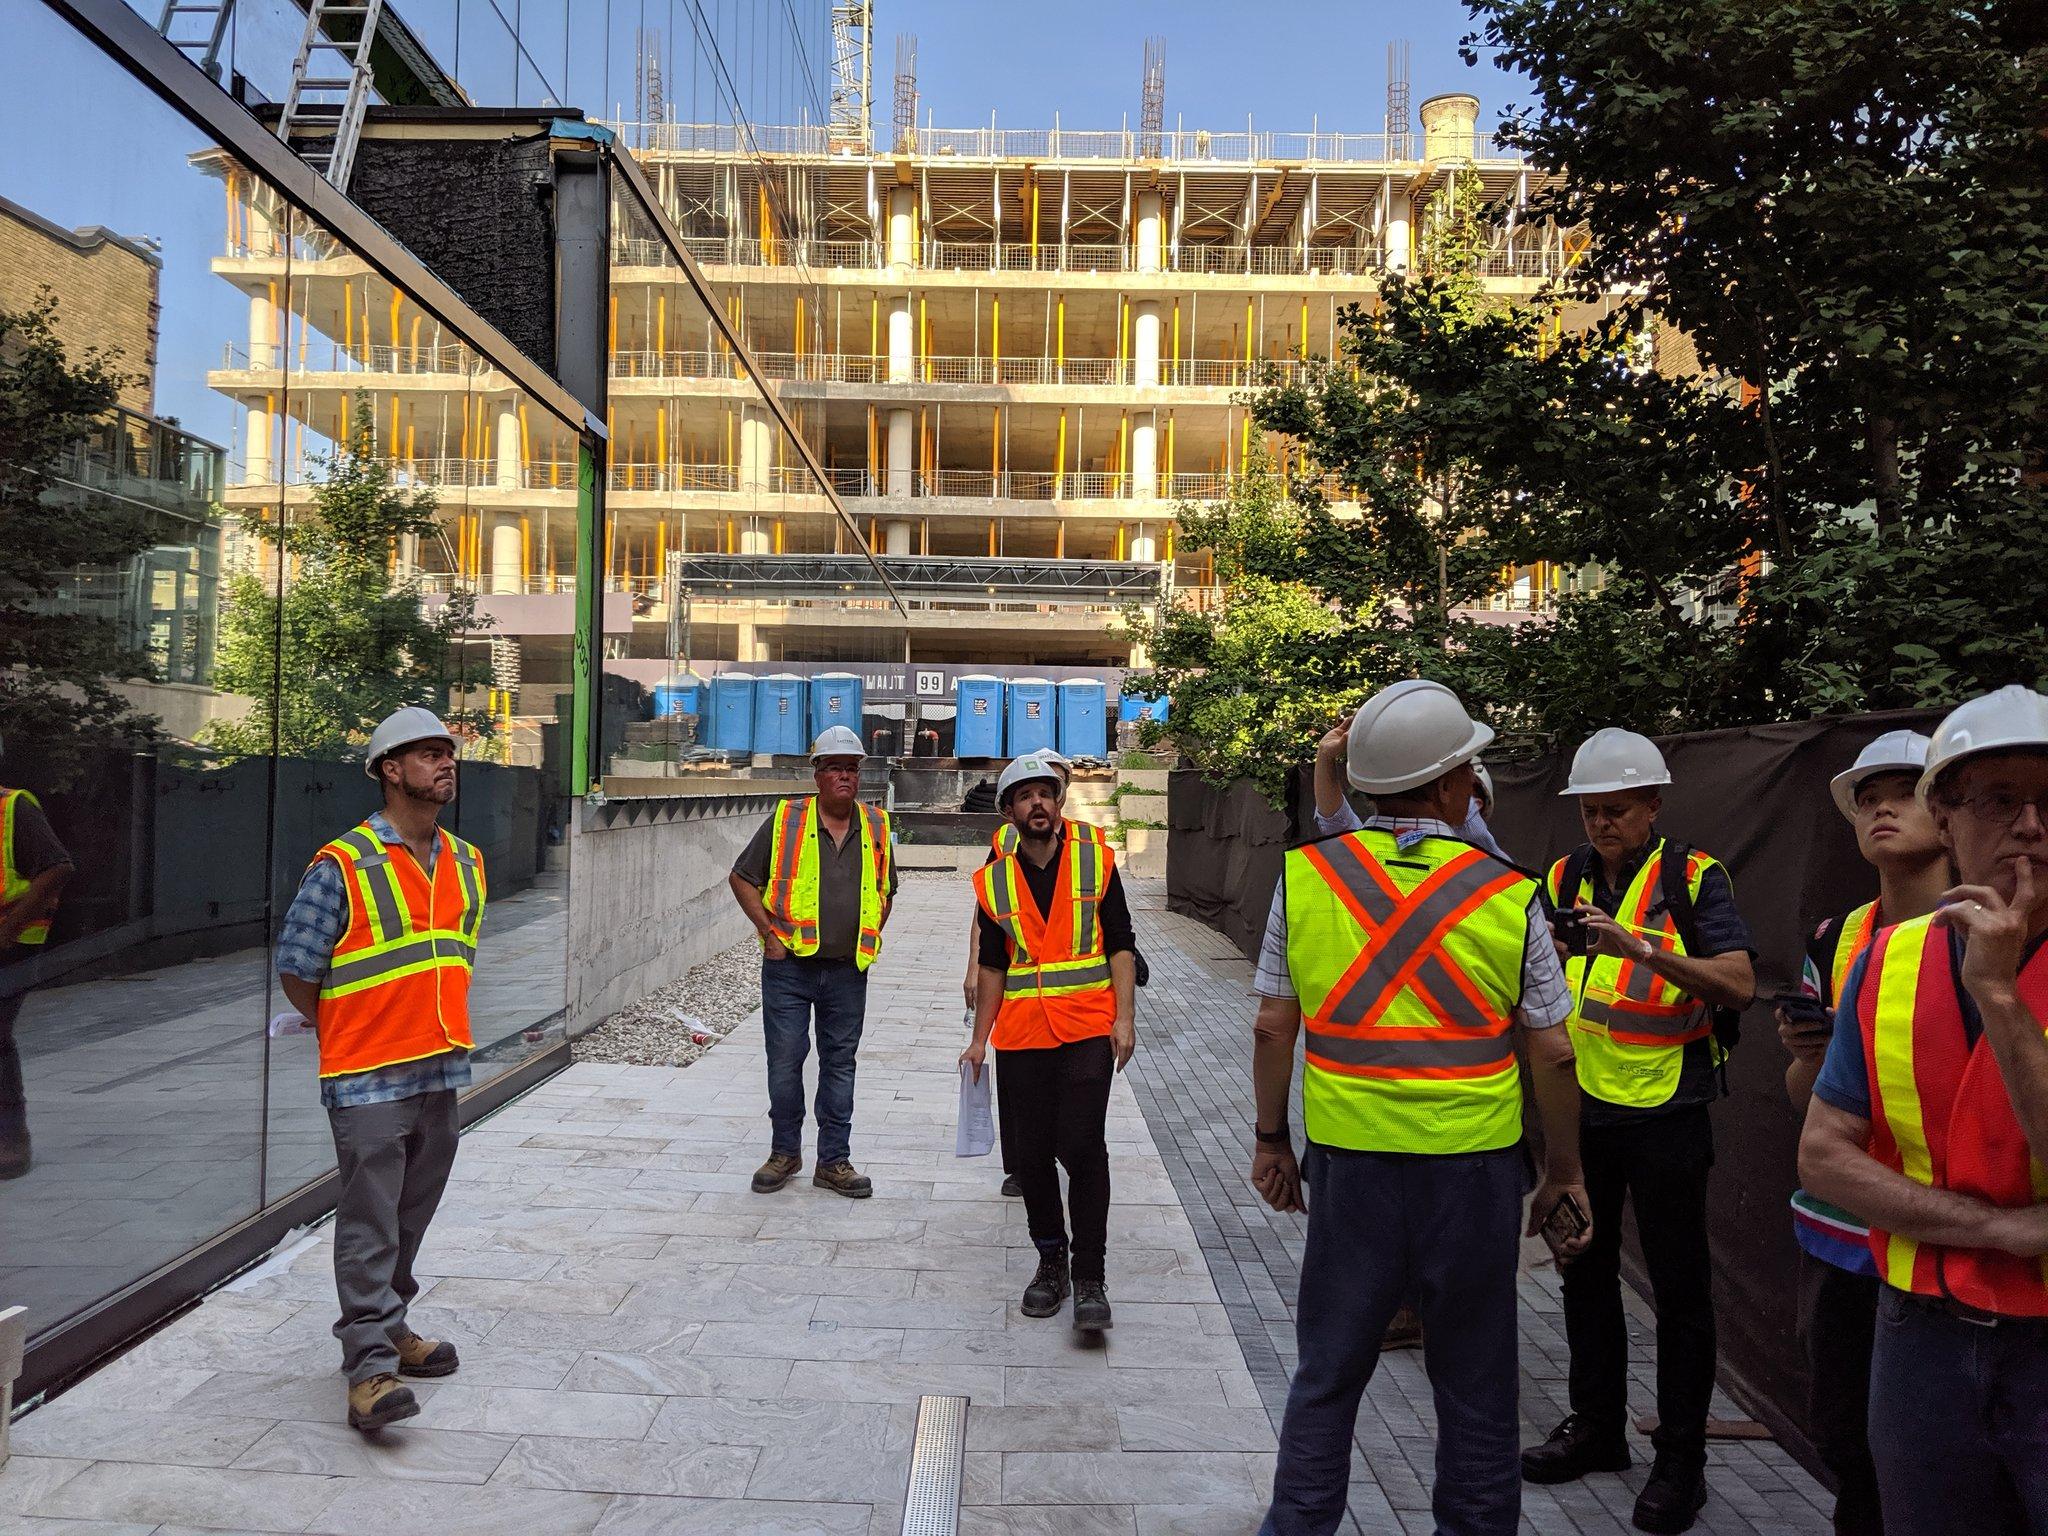 Wayne McMillan walking down a laneway with other people in construction site safety gear, with the half-finished 80 Alantic in the background showing several floors of exposed wood ceiling and columns